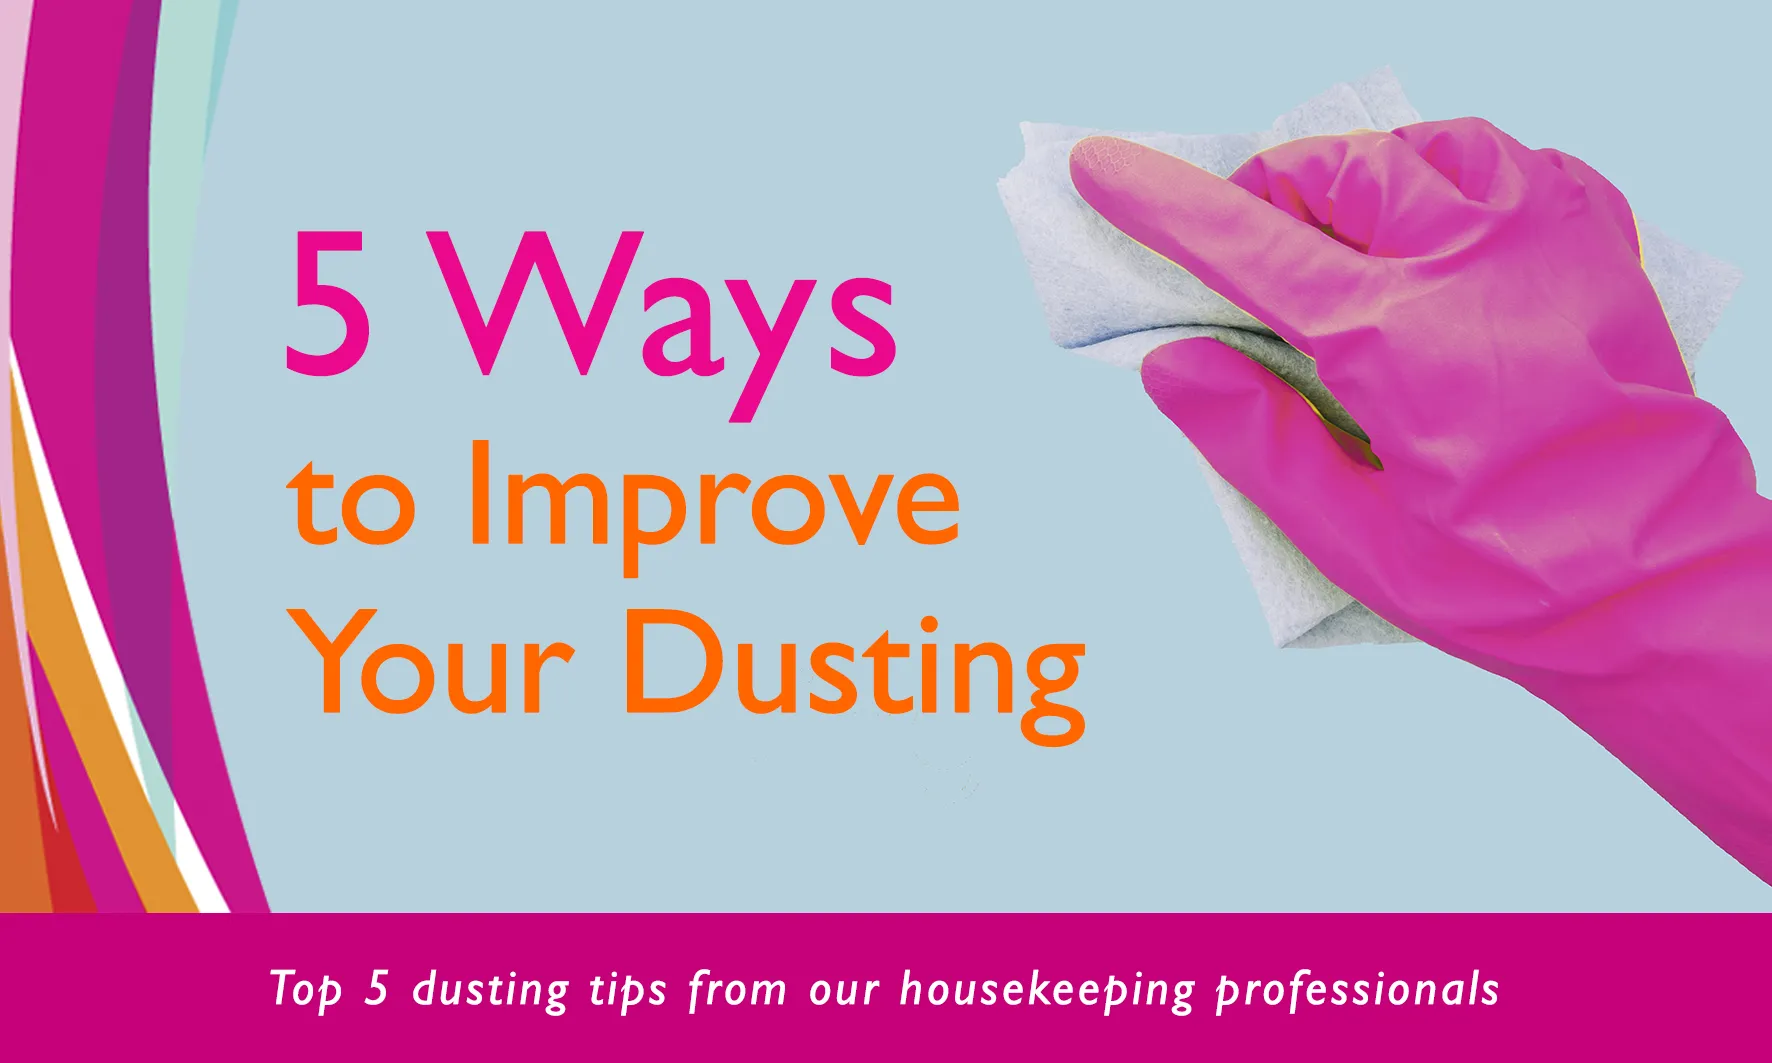 Don’t Waste Time! Five Ways To Improve Your Dusting